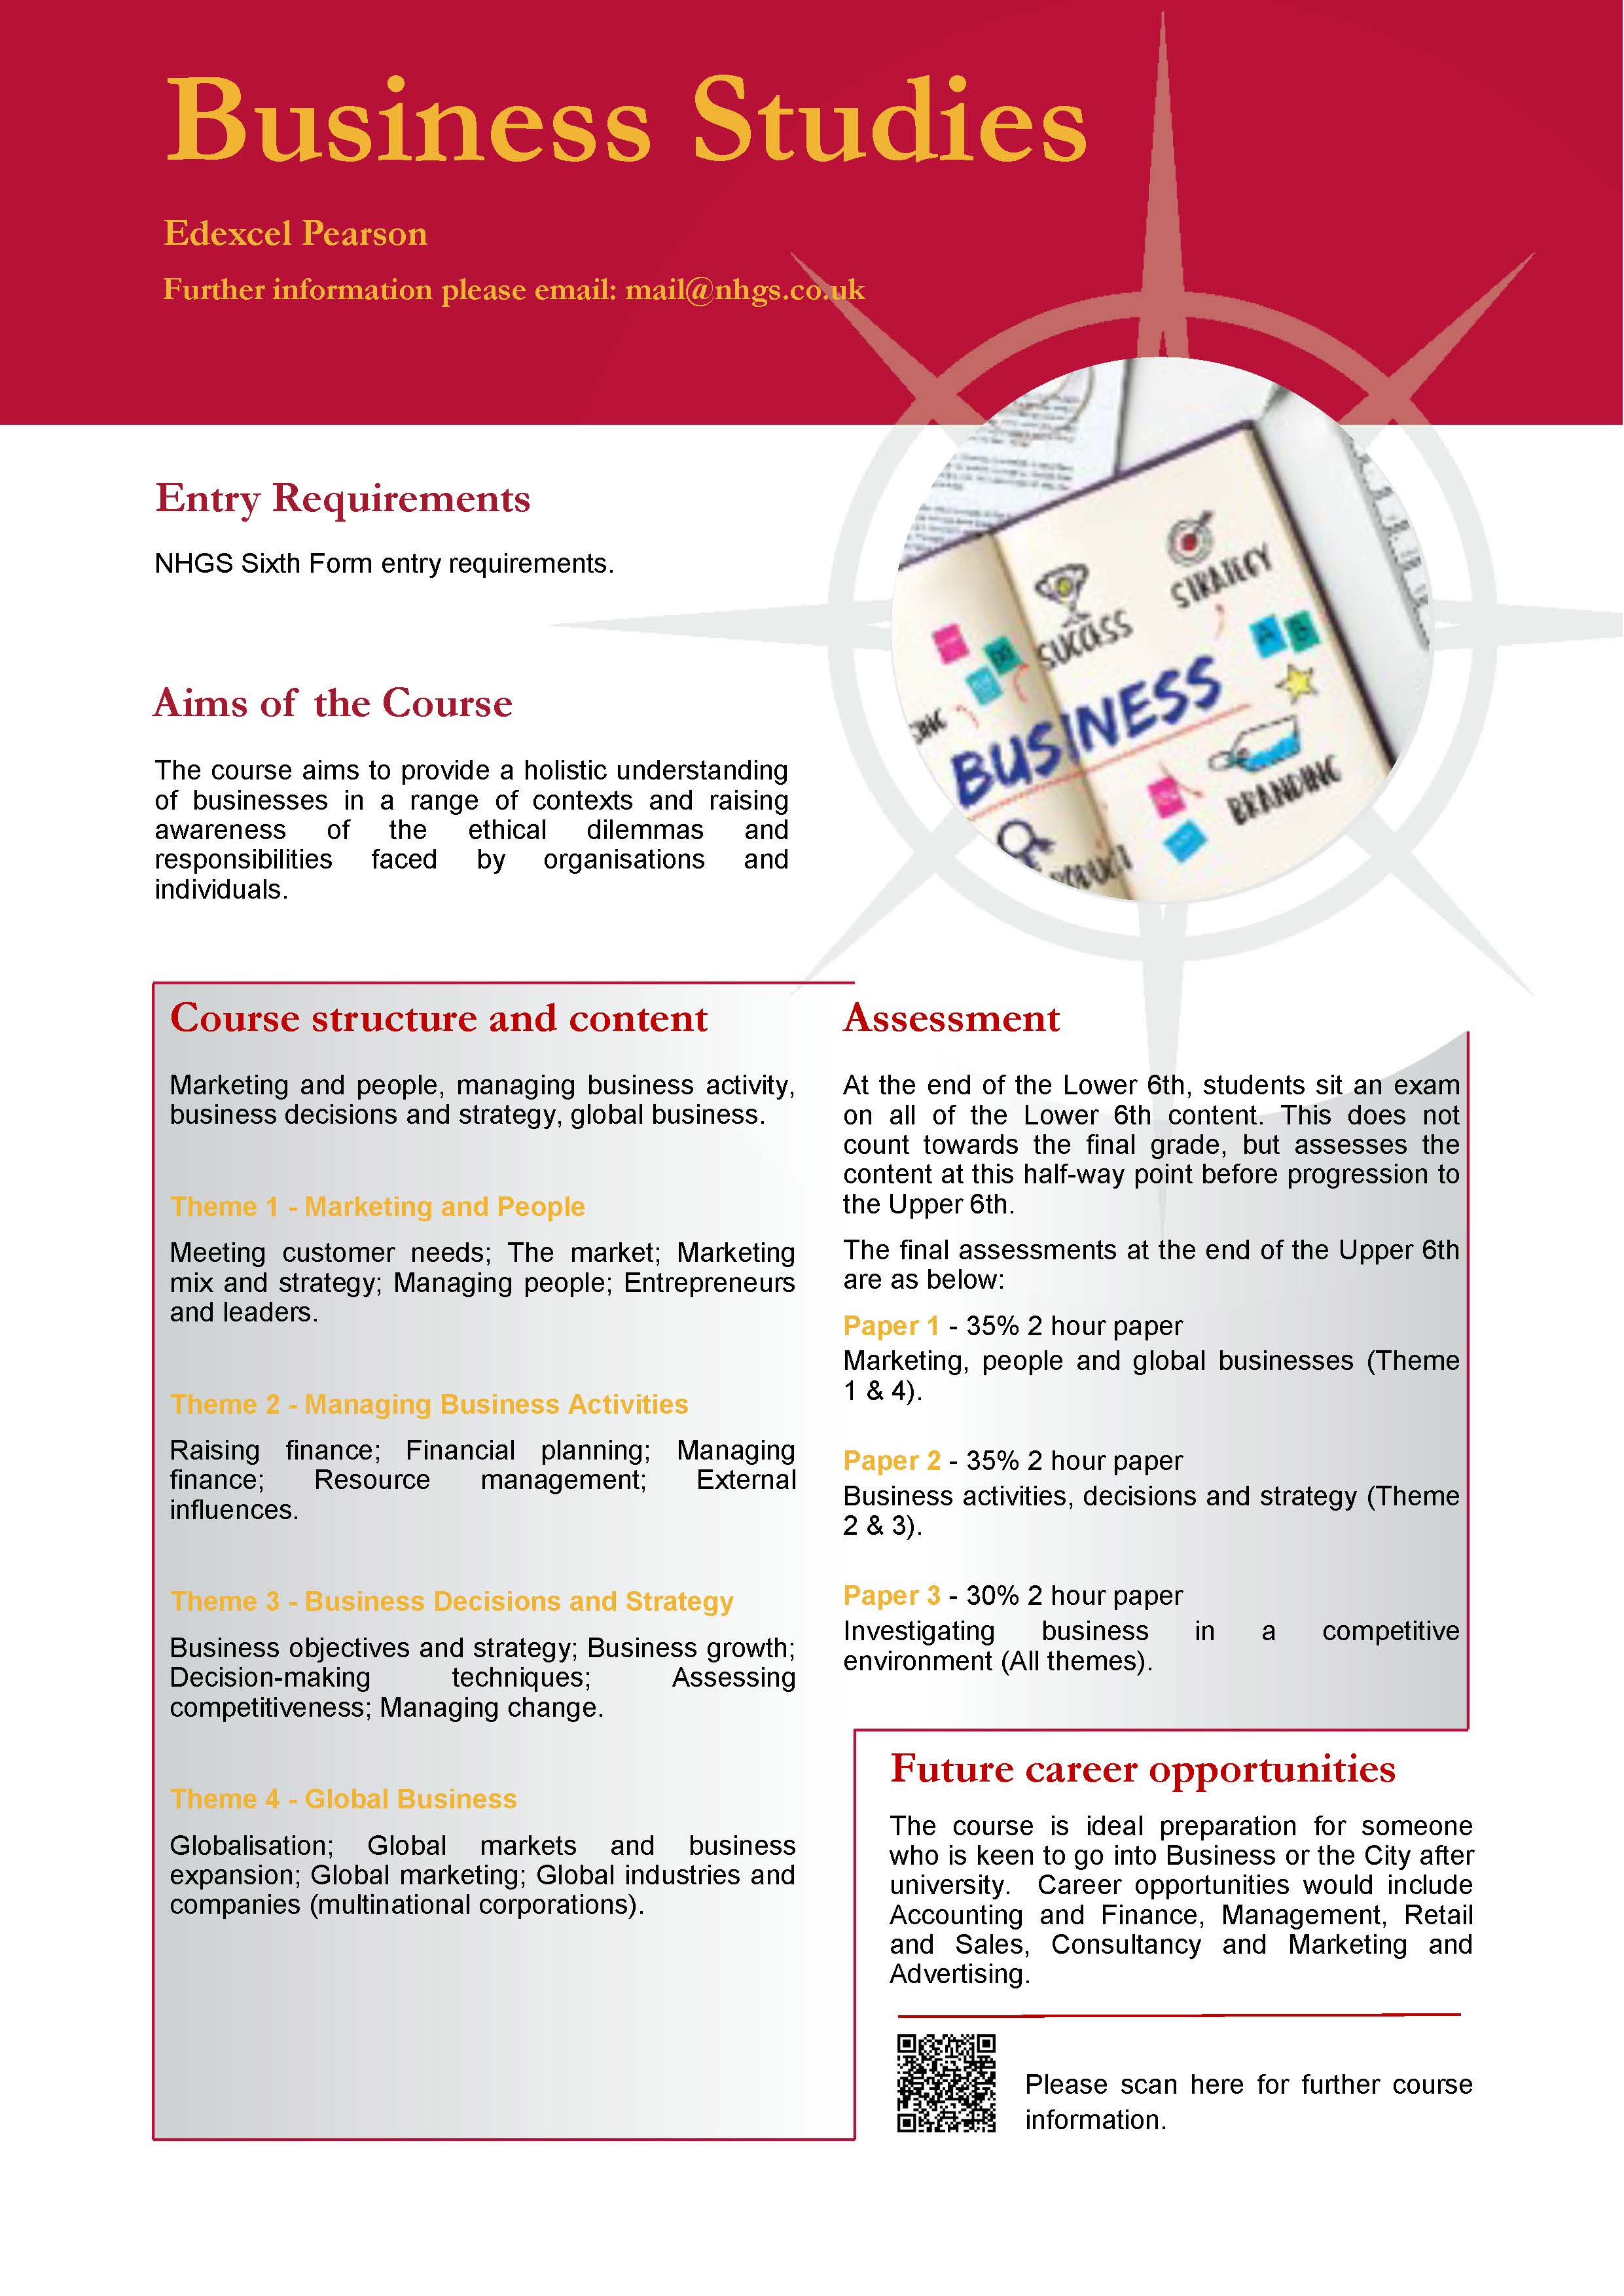 Business A Level Course Flyer, NHGS Sixth Form